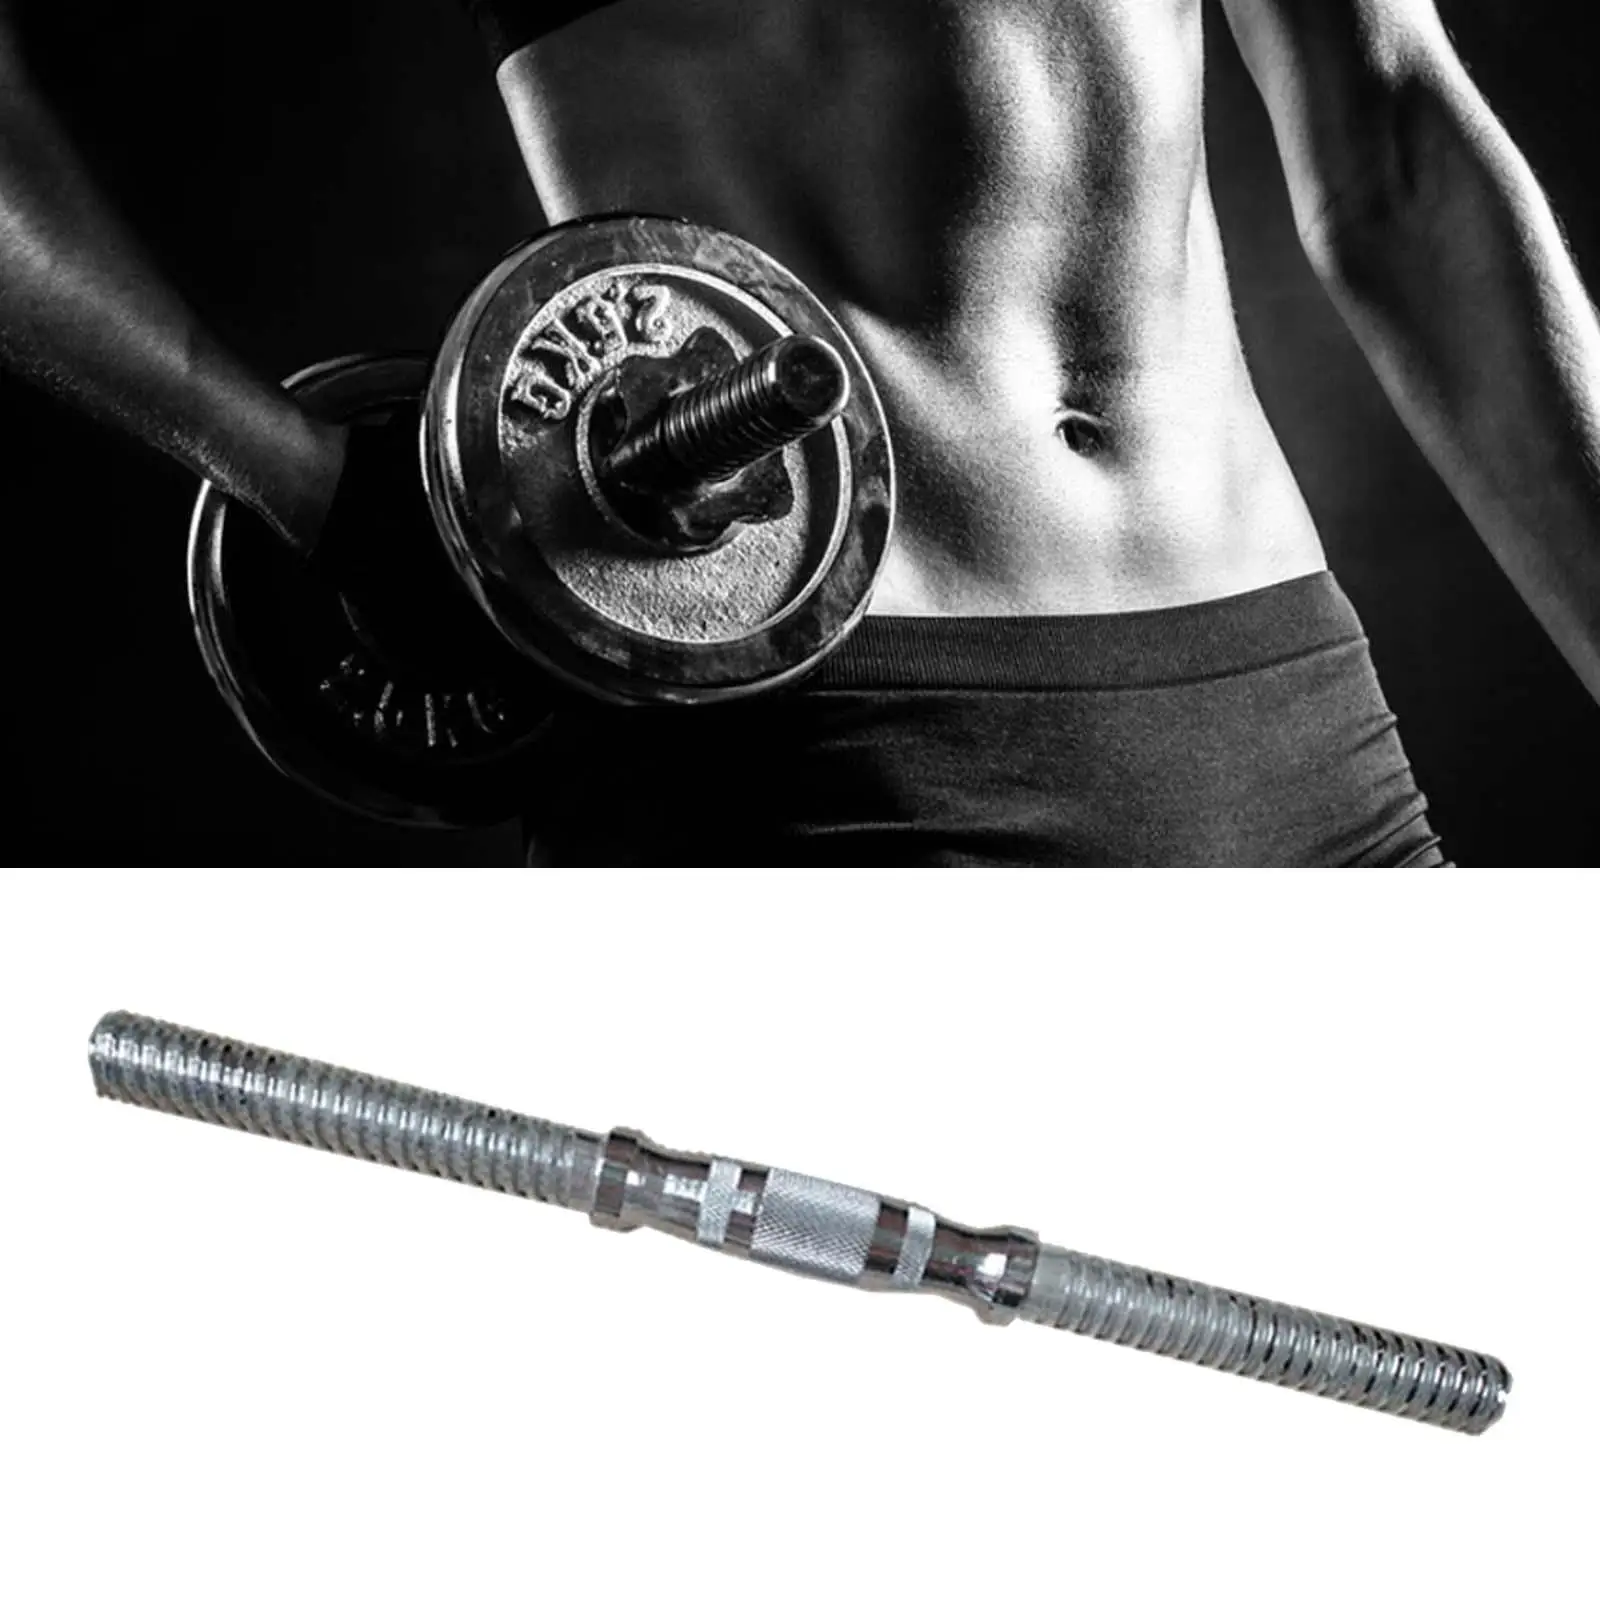 Dumbbell Bar Steel Fit 1 inch Standard Weight Plates Barbell Handle for Fitness Equipment Sport Gym Exercise Strength Training